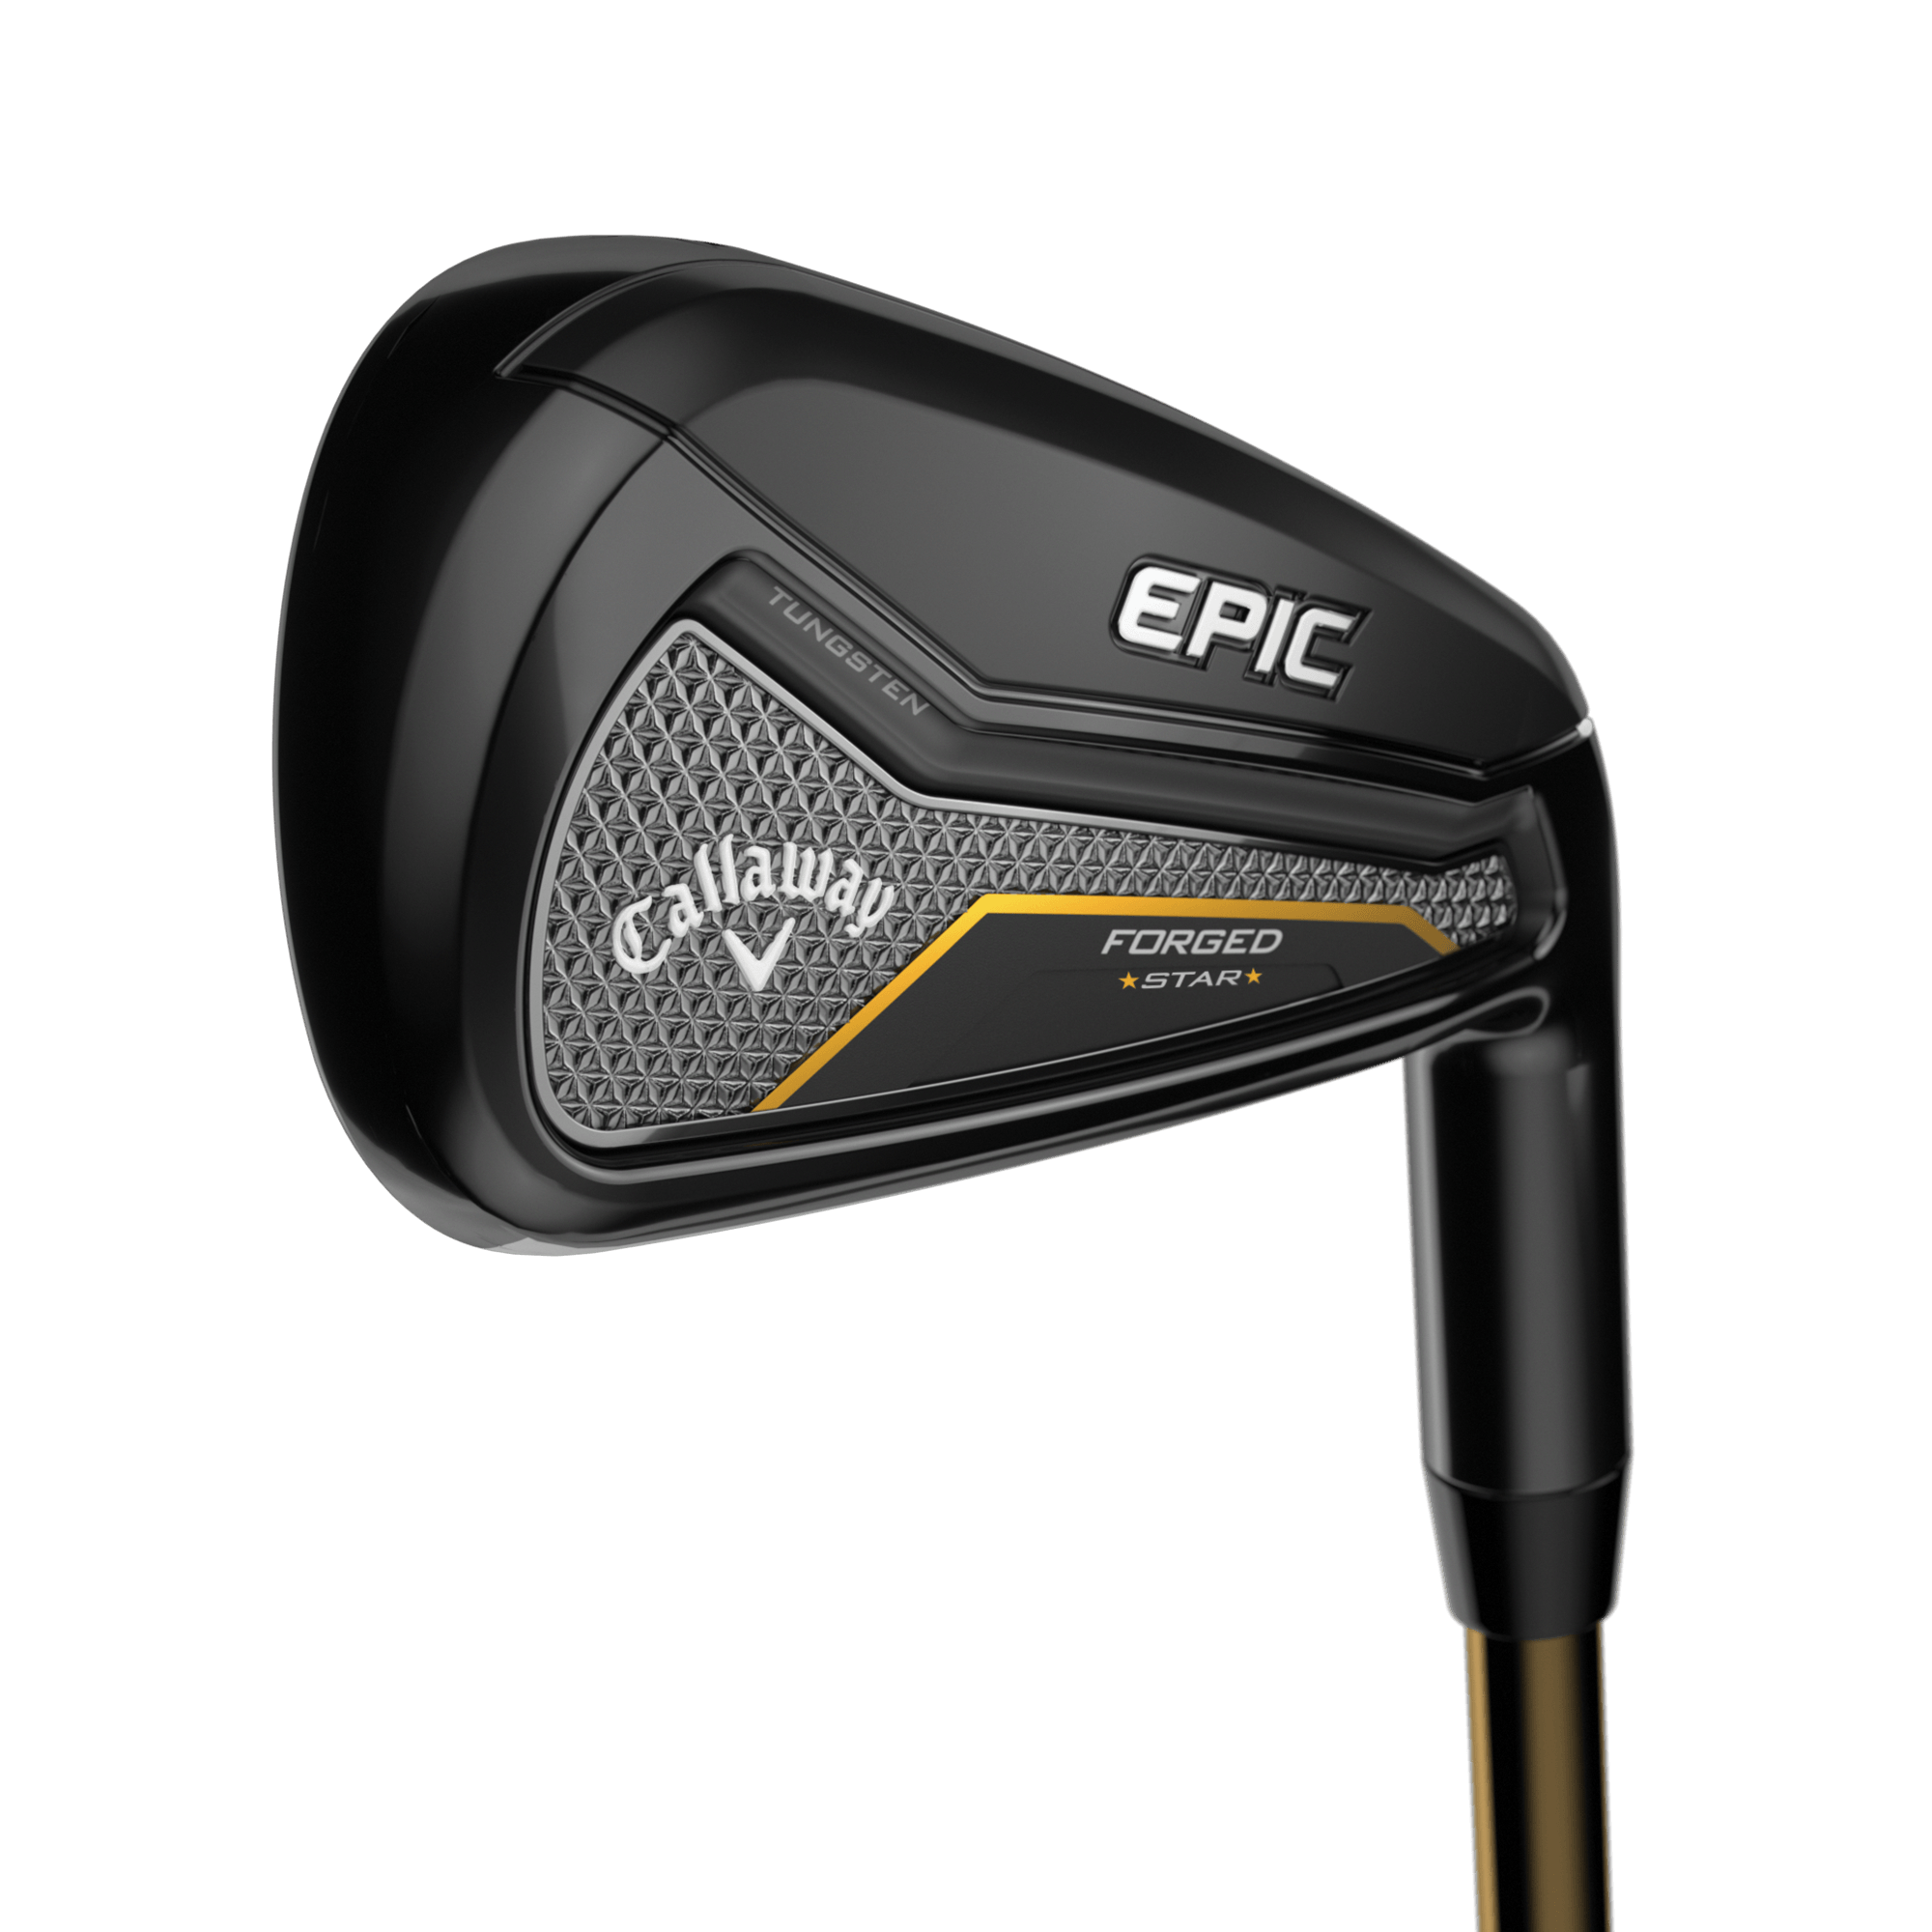 Callaway Epic Forged Star Irons | Callaway Golf Pre-Owned